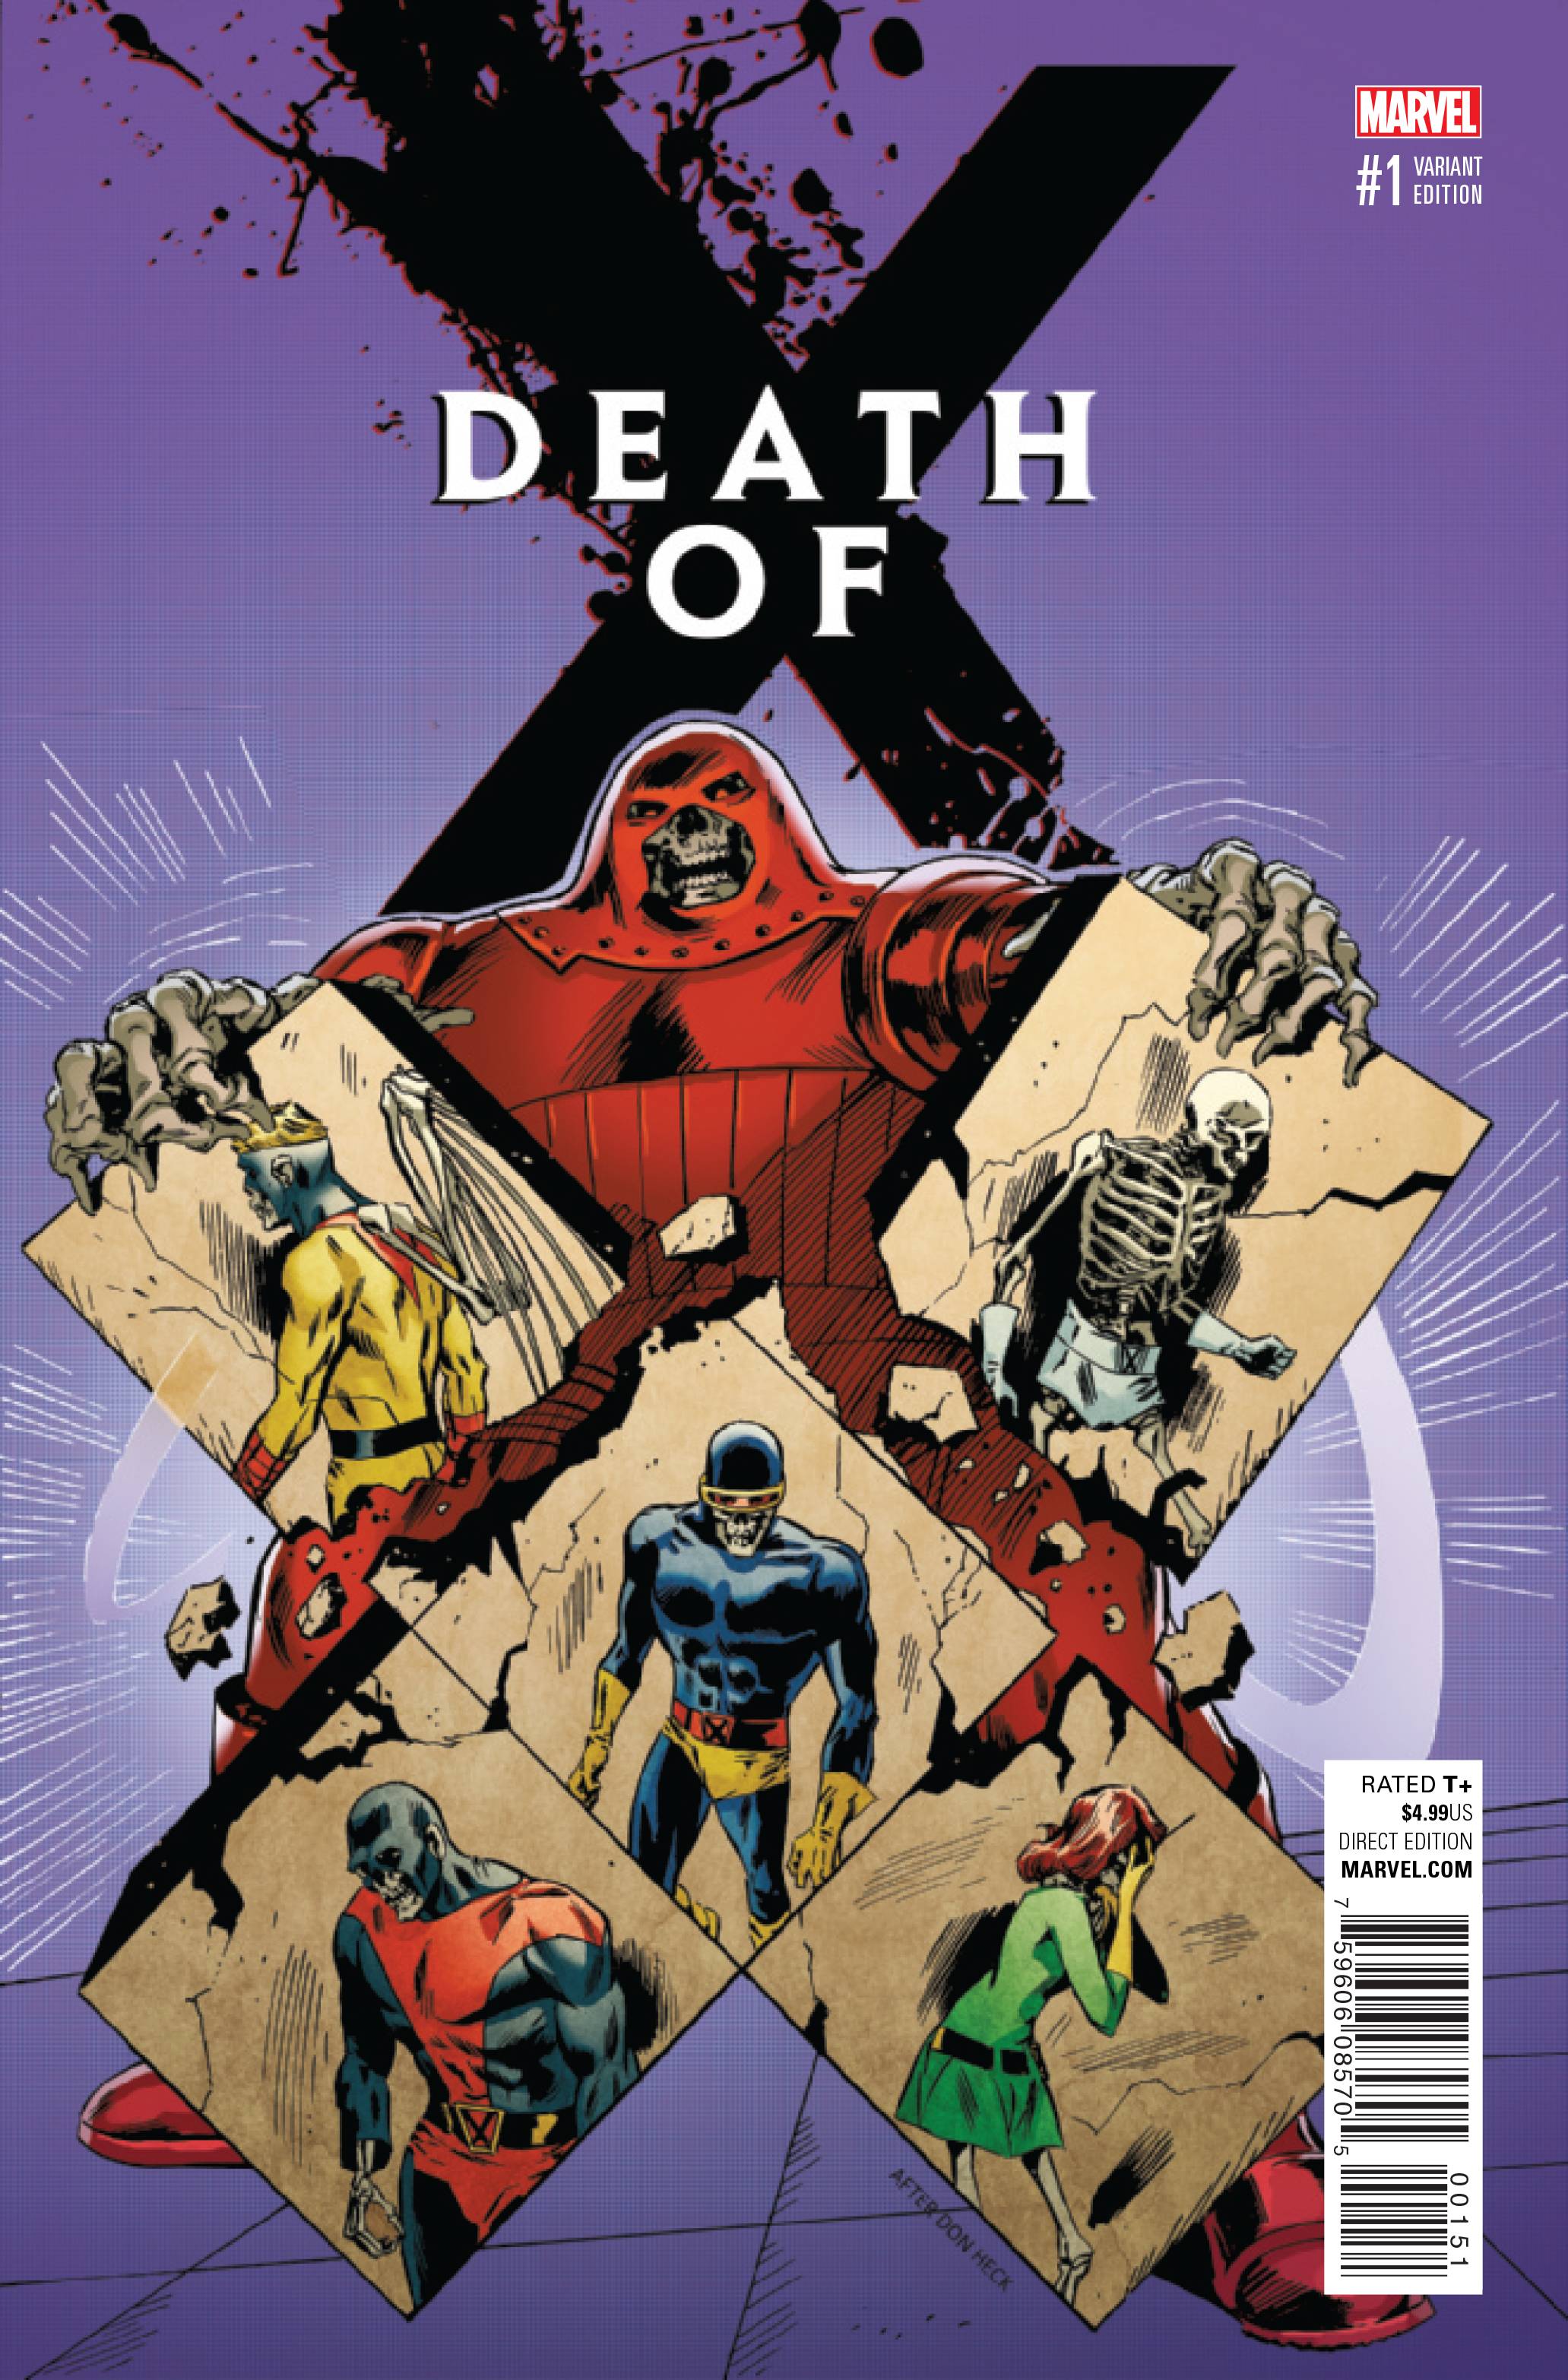 DEATH OF X #1